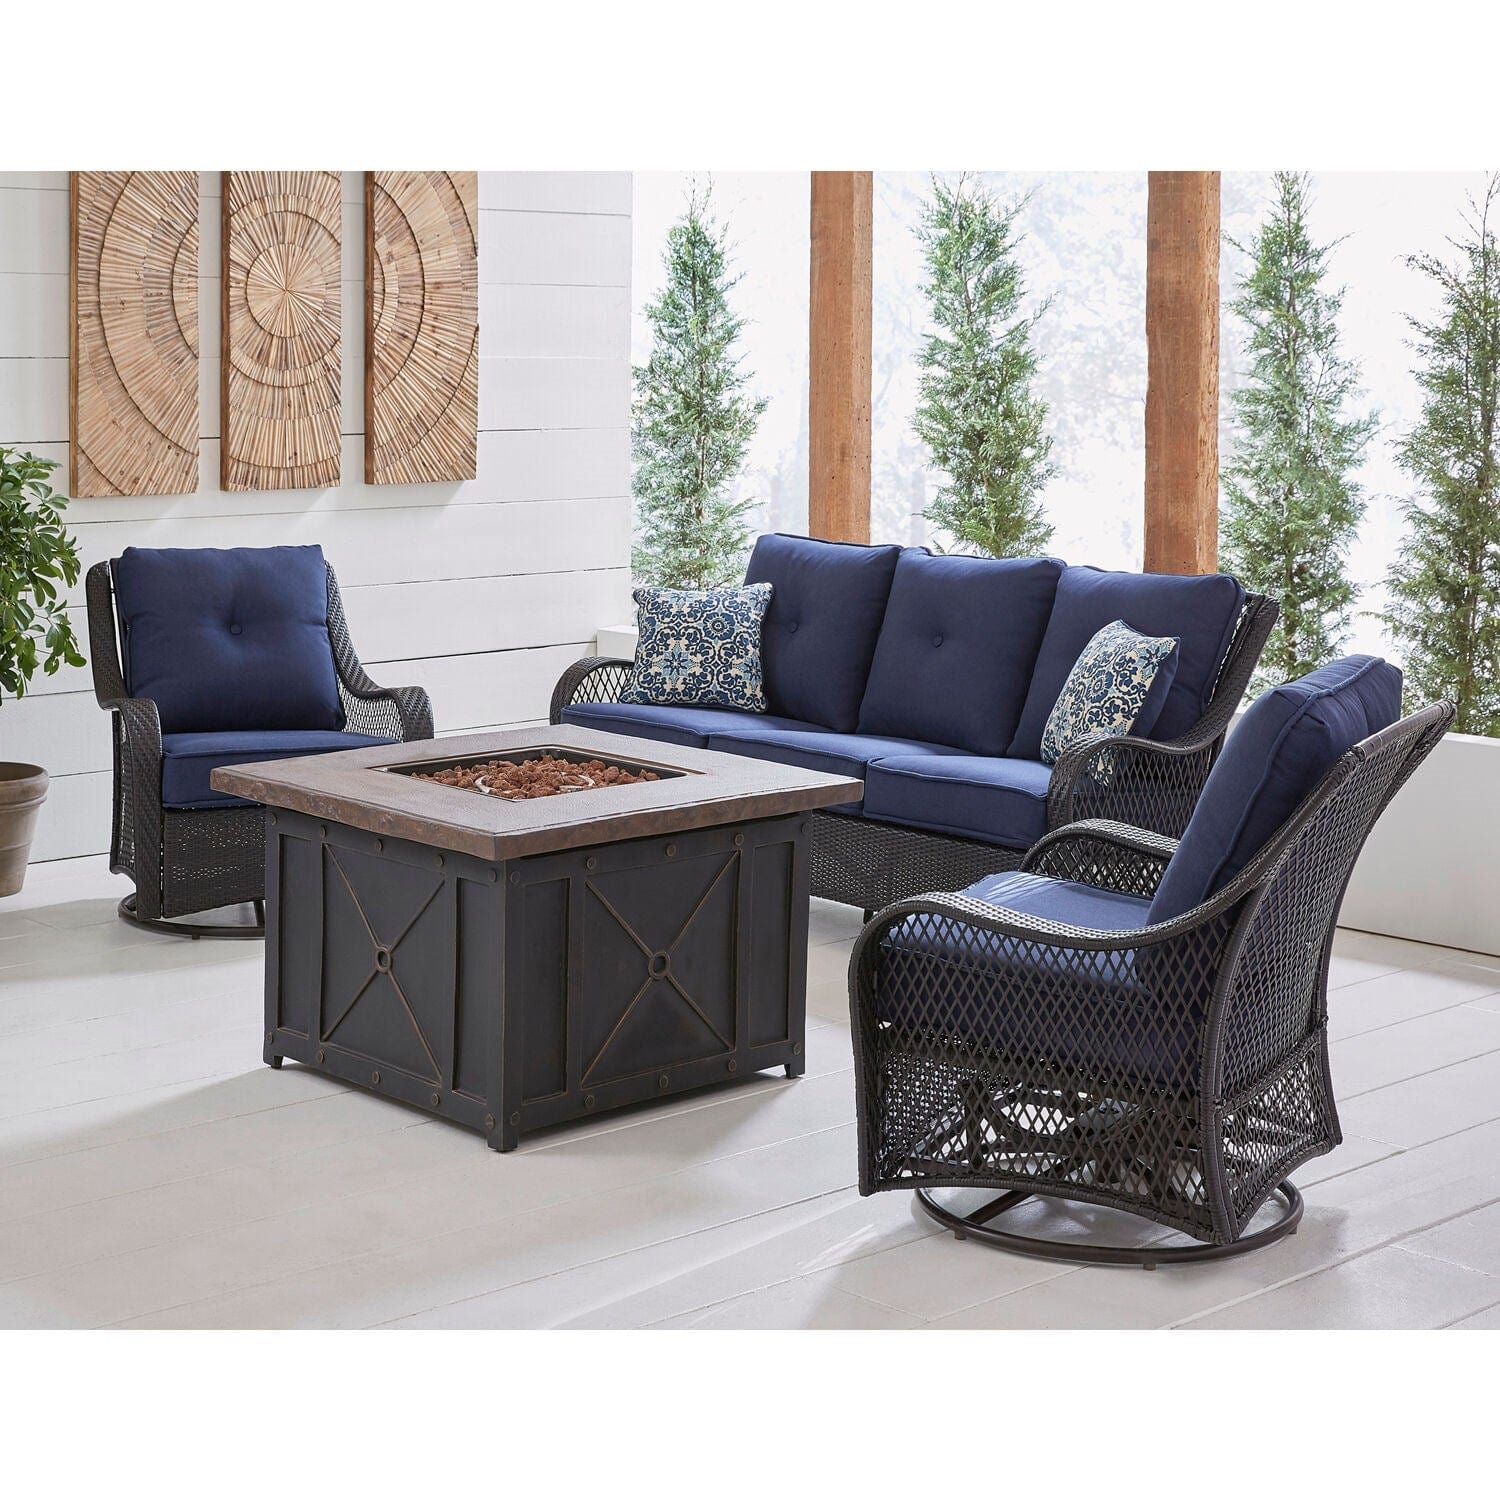 Hanover Fire Pit Chat Set Hanover Orleans 4-Piece Woven Fire Pit Lounge Set in Navy Blue with Sofa, 2 Swivel Gliders and Durastone Fire Pit | ORL4PCDFPSW2-NVY